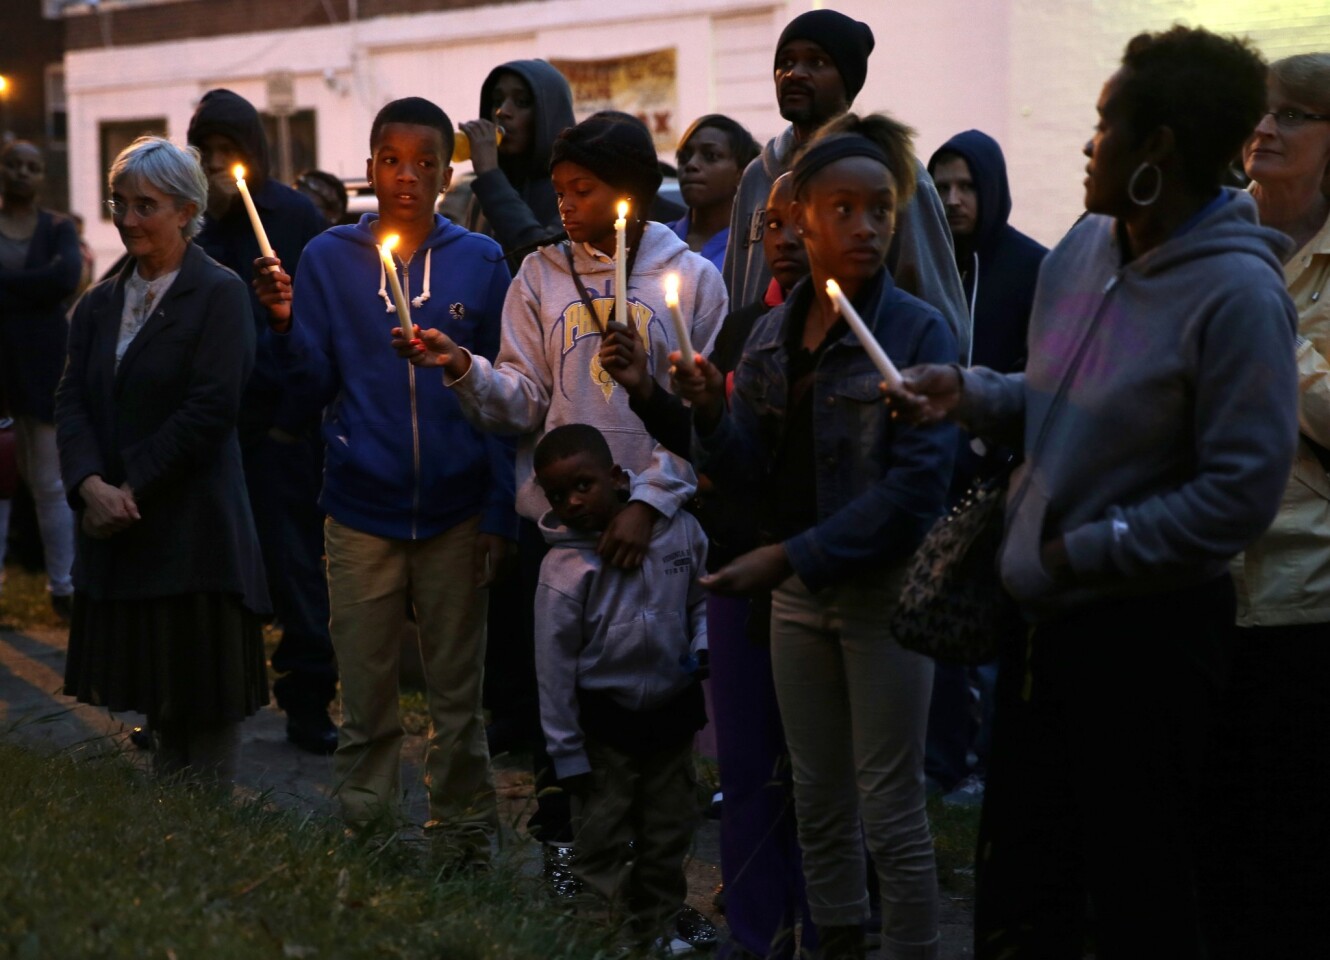 People gather to remember Vonderrit D. Myers, 18, fatally shot by a police officer in St. Louis on Wednesday.